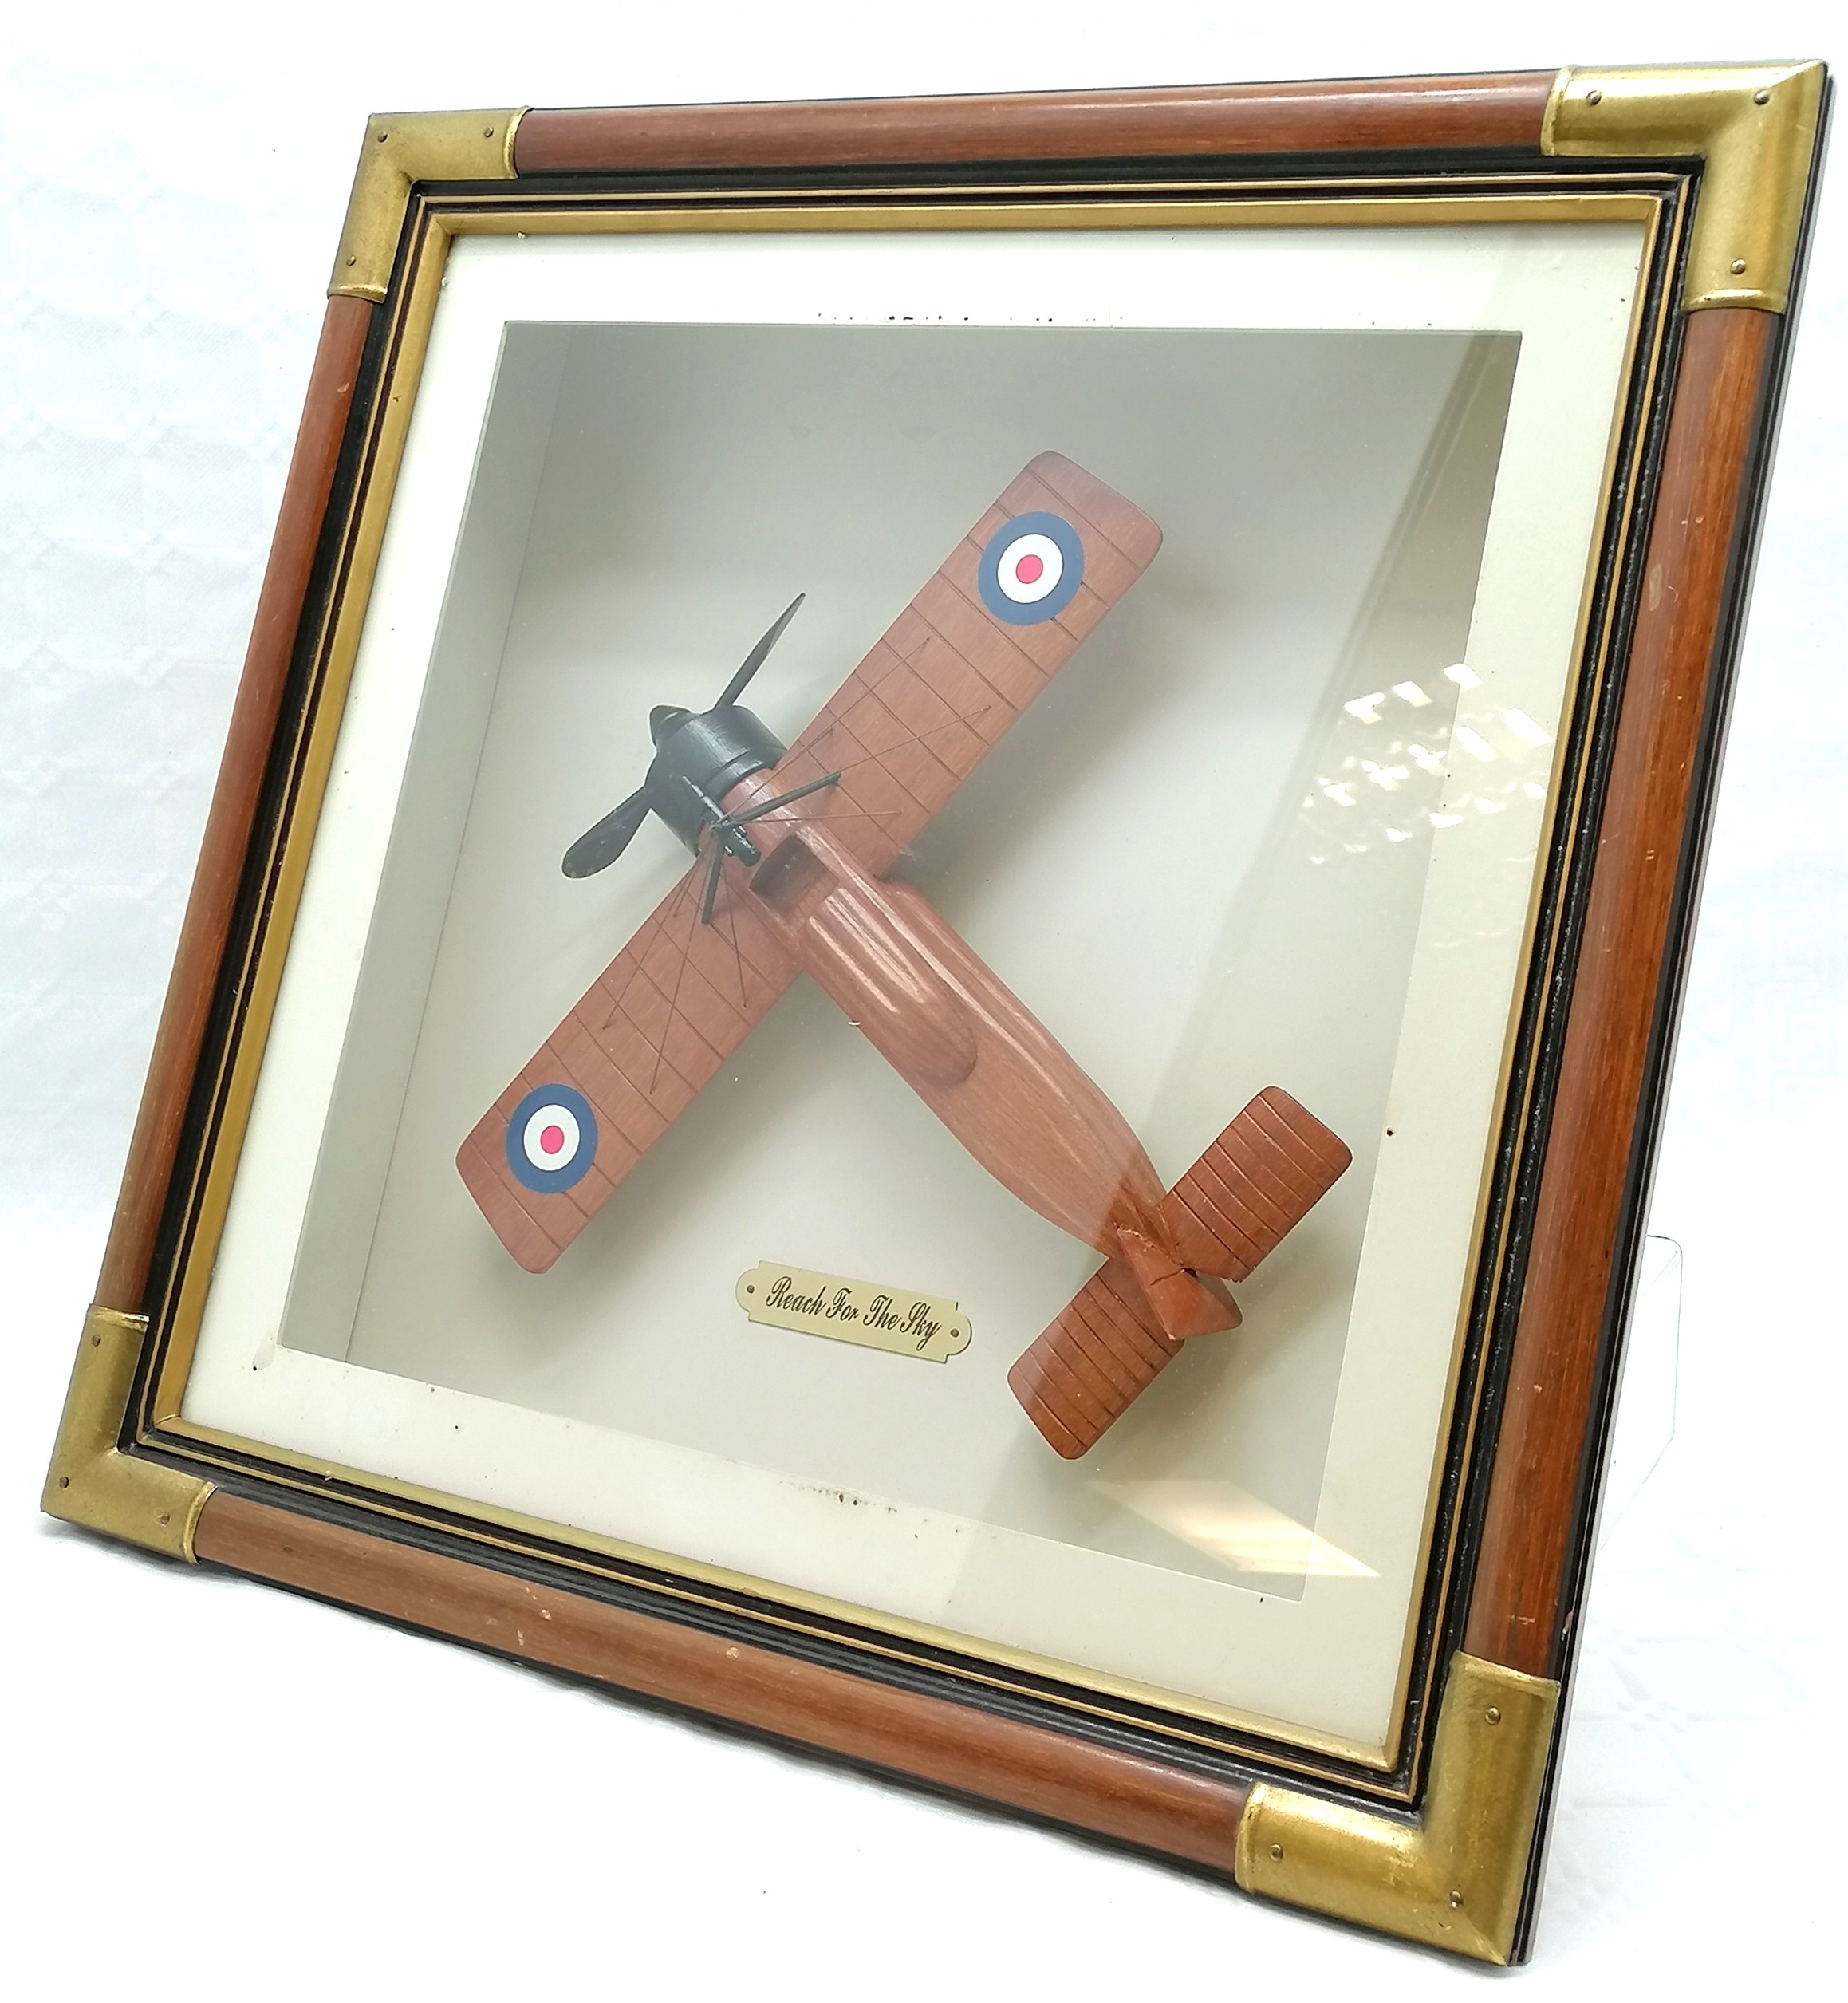 Box framed wooden model of a monoplane 'Reach for the sky' - frame 50cm square